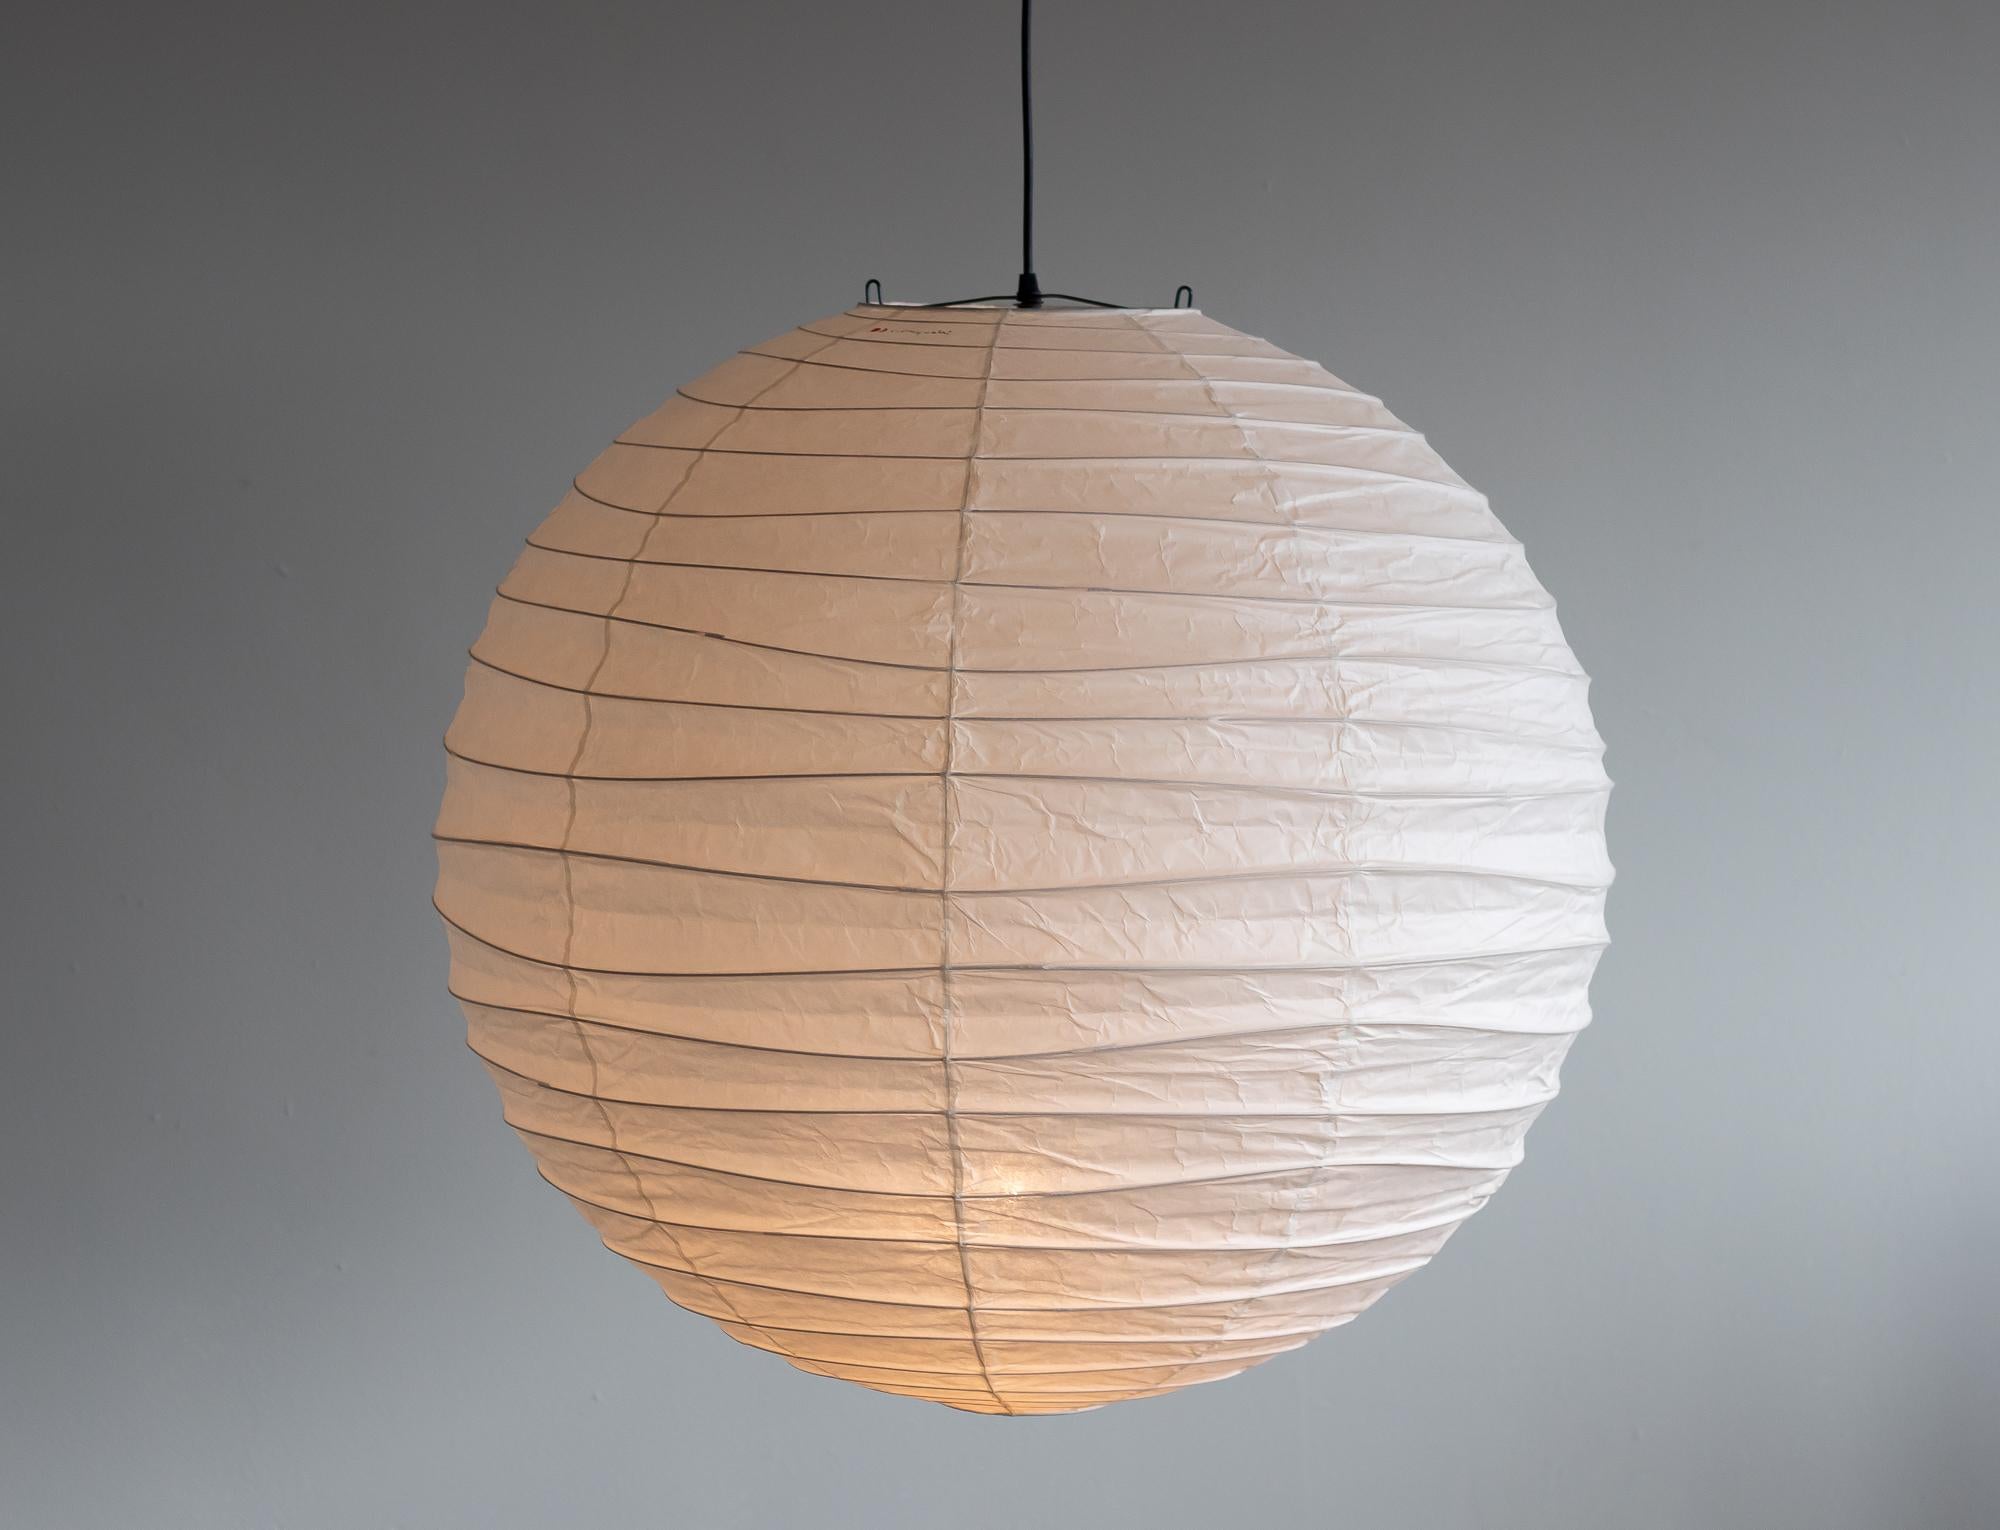 Akari 75D lamp designed by Isamu Noguchi, 1951. Manufactured by Ozeki & Co. in Japan. 
Bambu structure covered by washi paper. Rewired for U.S. standards. New cord and canopy from Noguchi Museum. 
This fixture has one socket. We recommend one E27